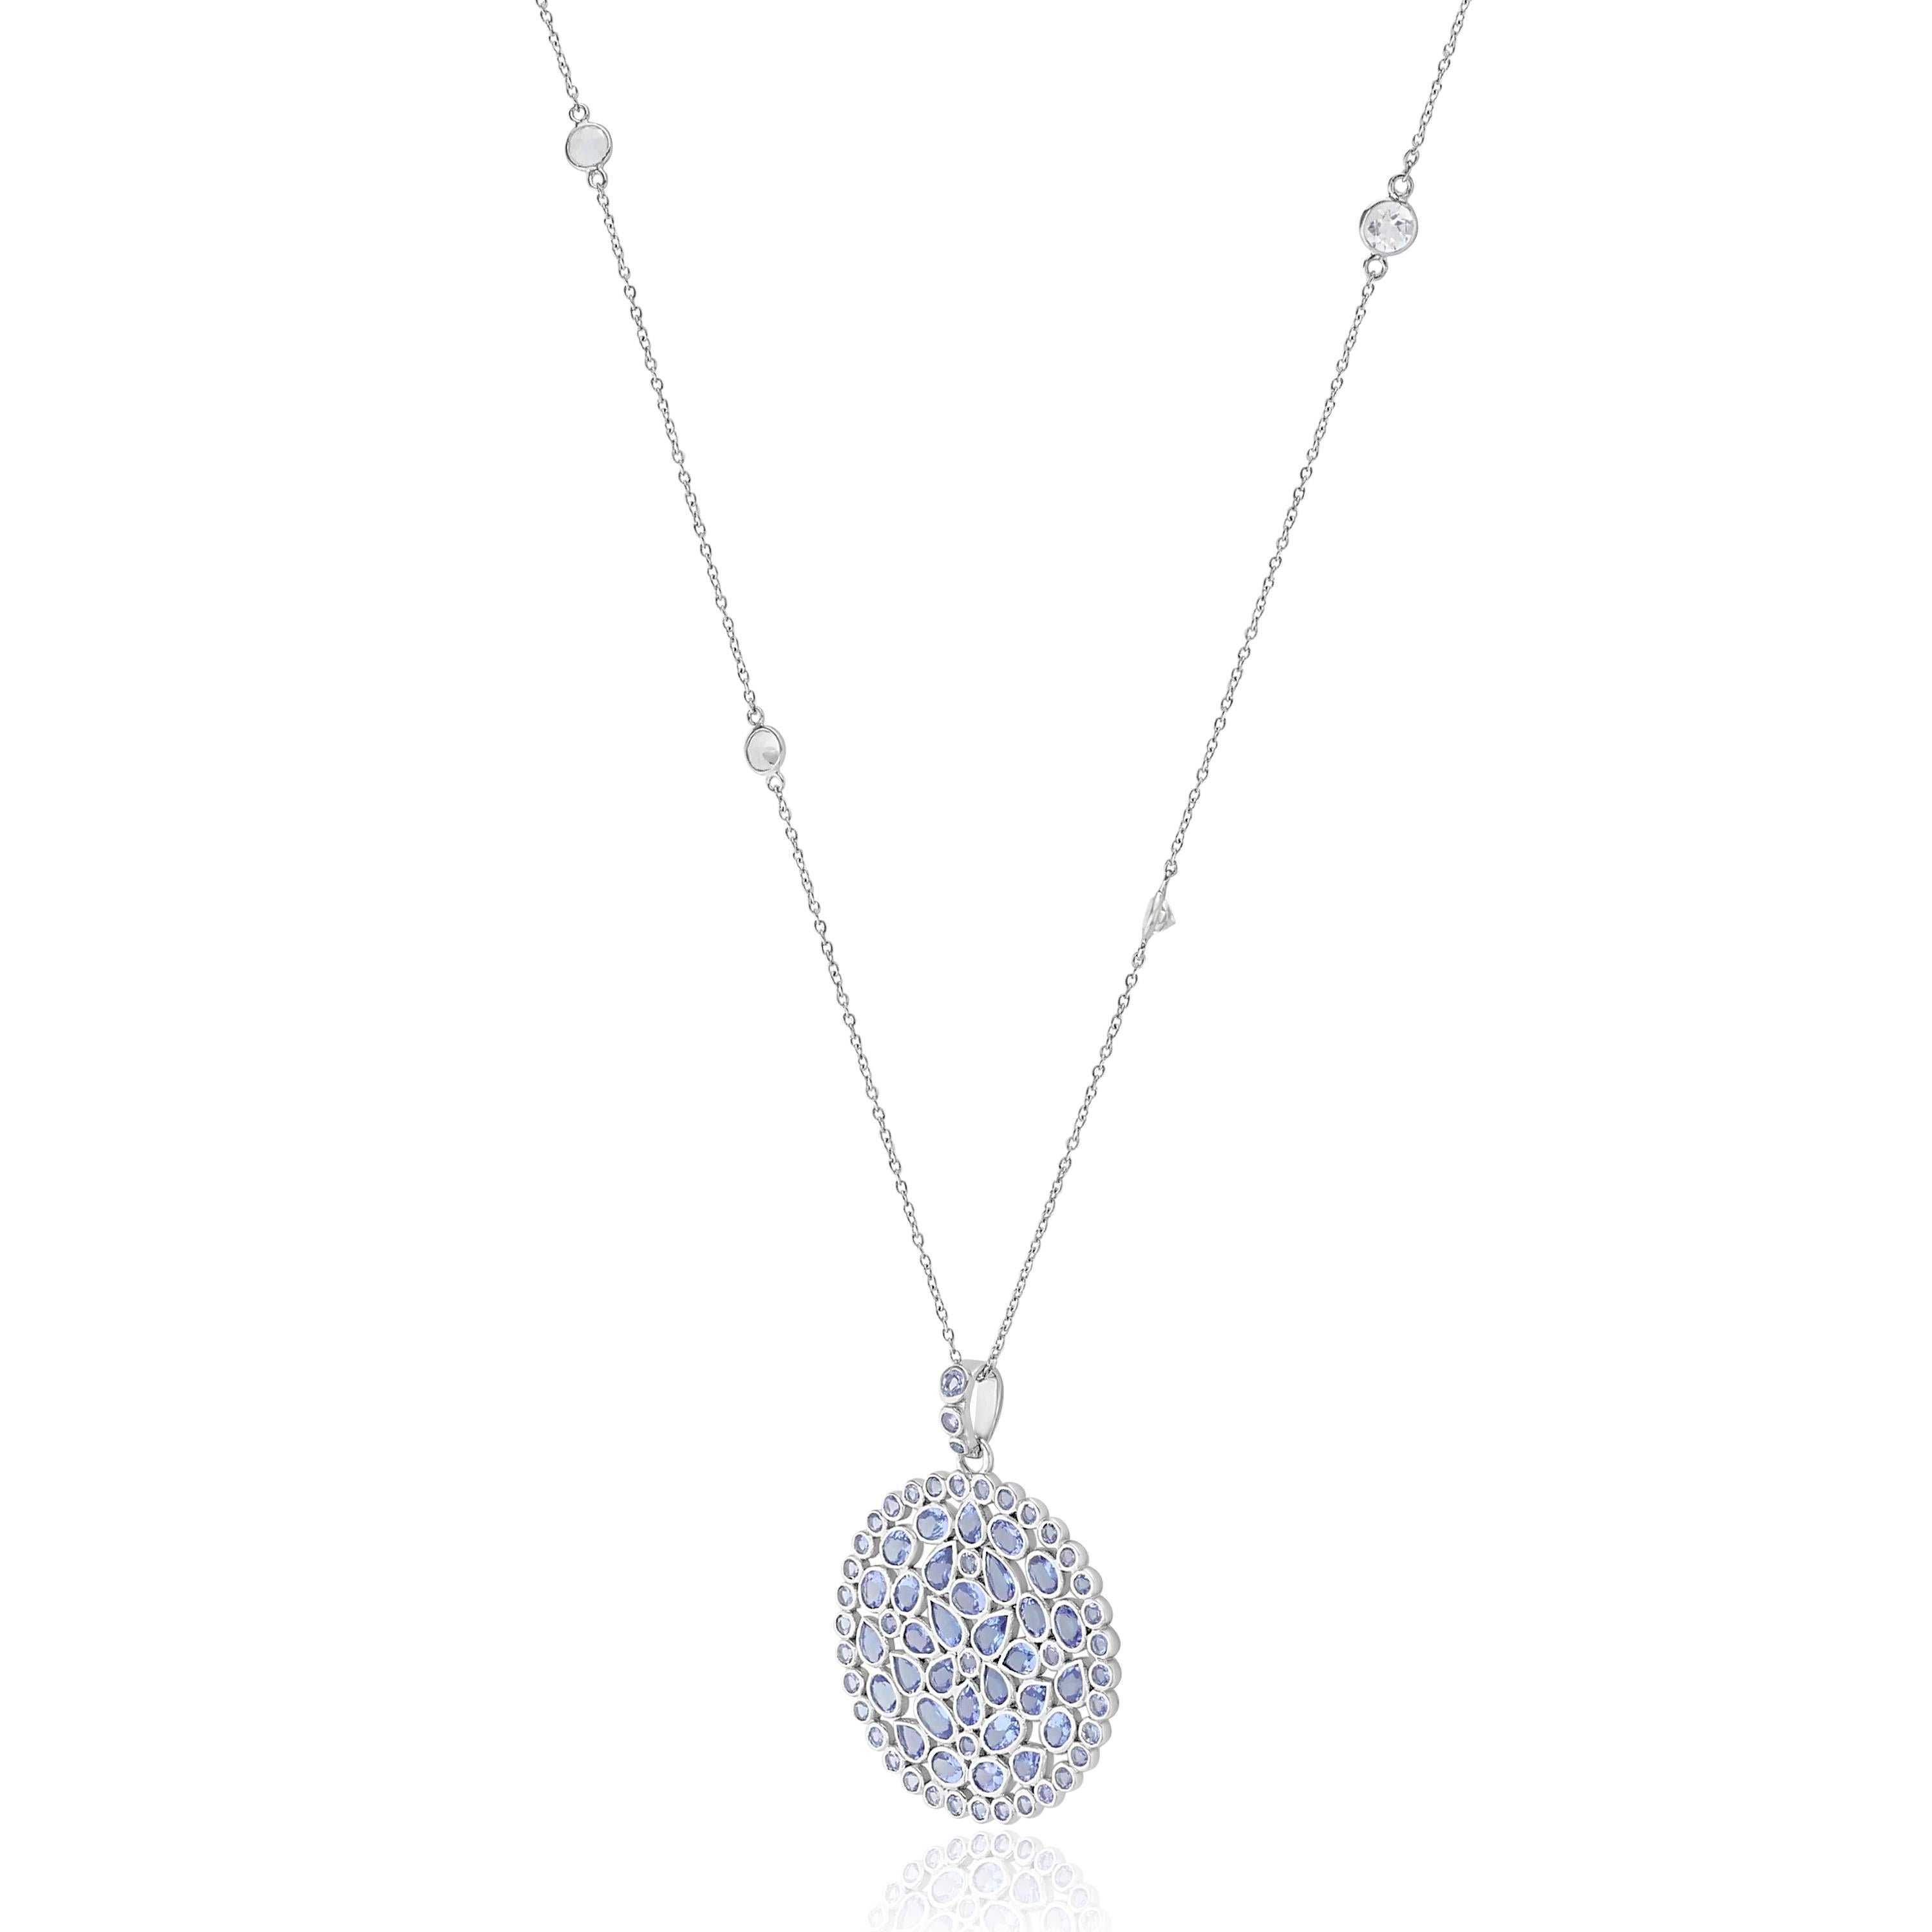 Modern Tanzanite and White Topaz Pendant Necklace in Sterling Silver